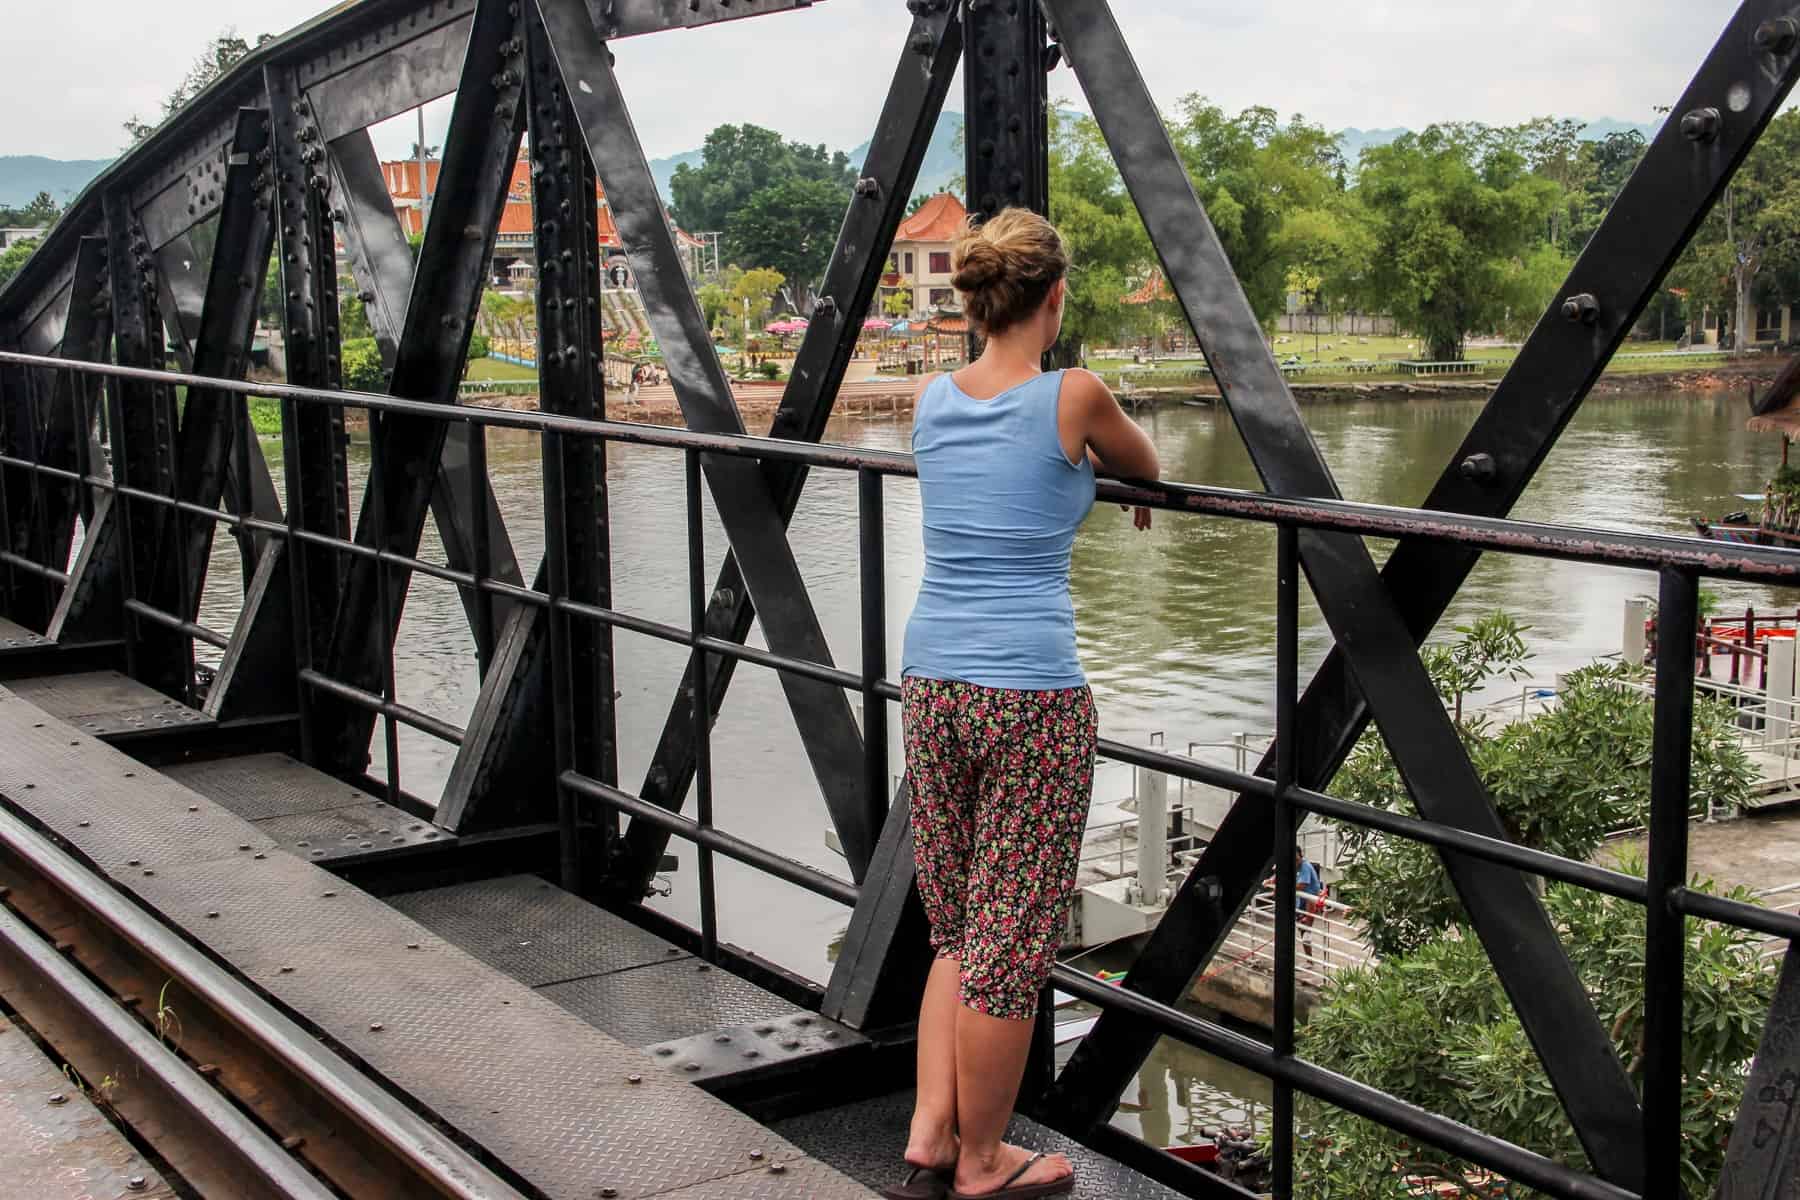 A woman leans on black rails on a platform on the Bridge over the River Kwai looking out towards the Thai river, greenery and orange roofed buildings. 